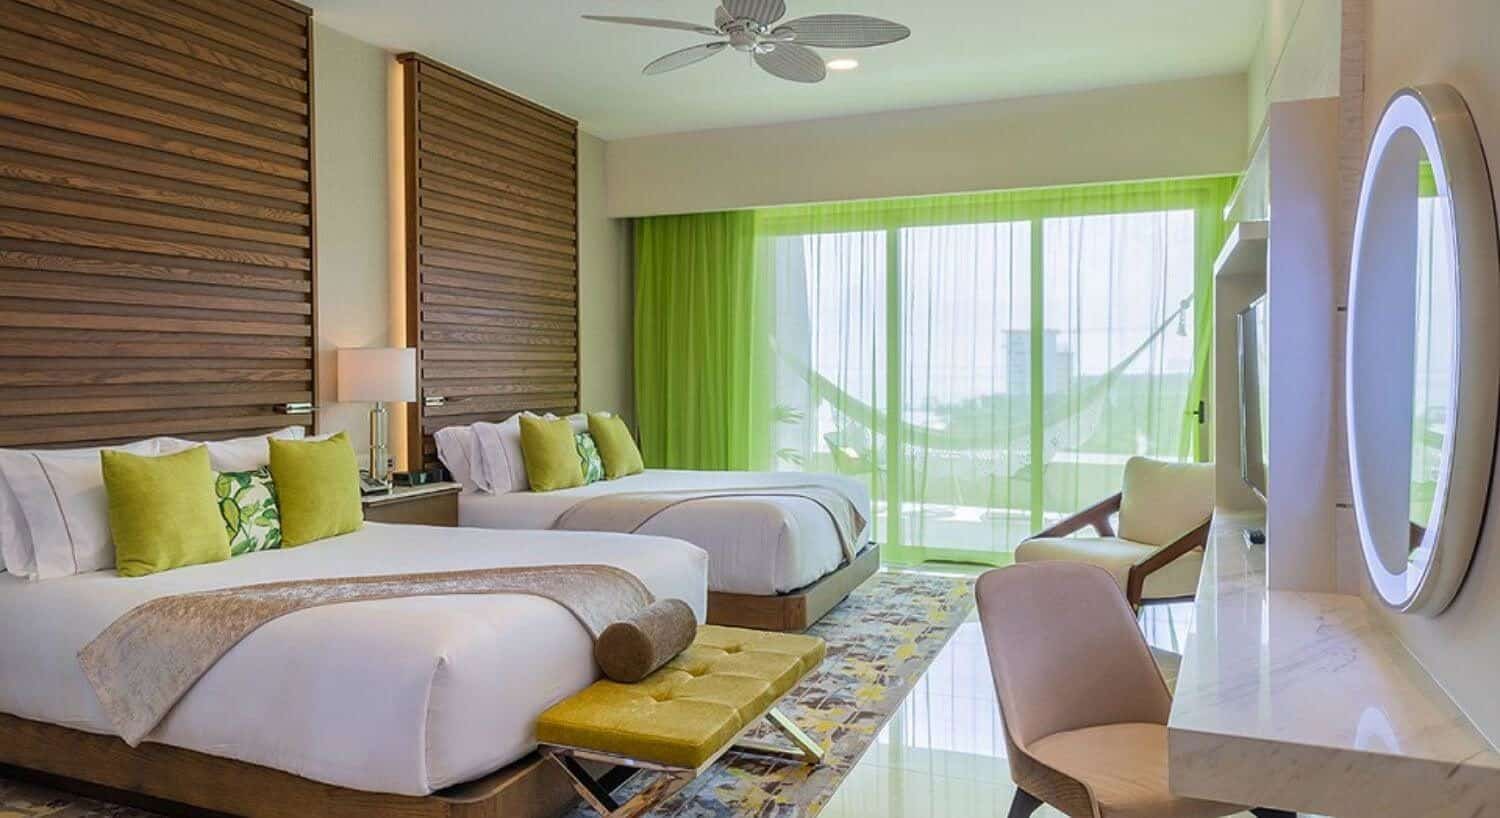 A bedroom with 2 queen beds with wood floor to ceiling headboards, a nightstand and lamp in between them, a sitting bench at the foot of one of the beds, a flat screen TvVand writing desk and chair on the opposite wall, and sheer green curtains over sliding glass doors that lead out to a balcony with patio furniture and a hammock.